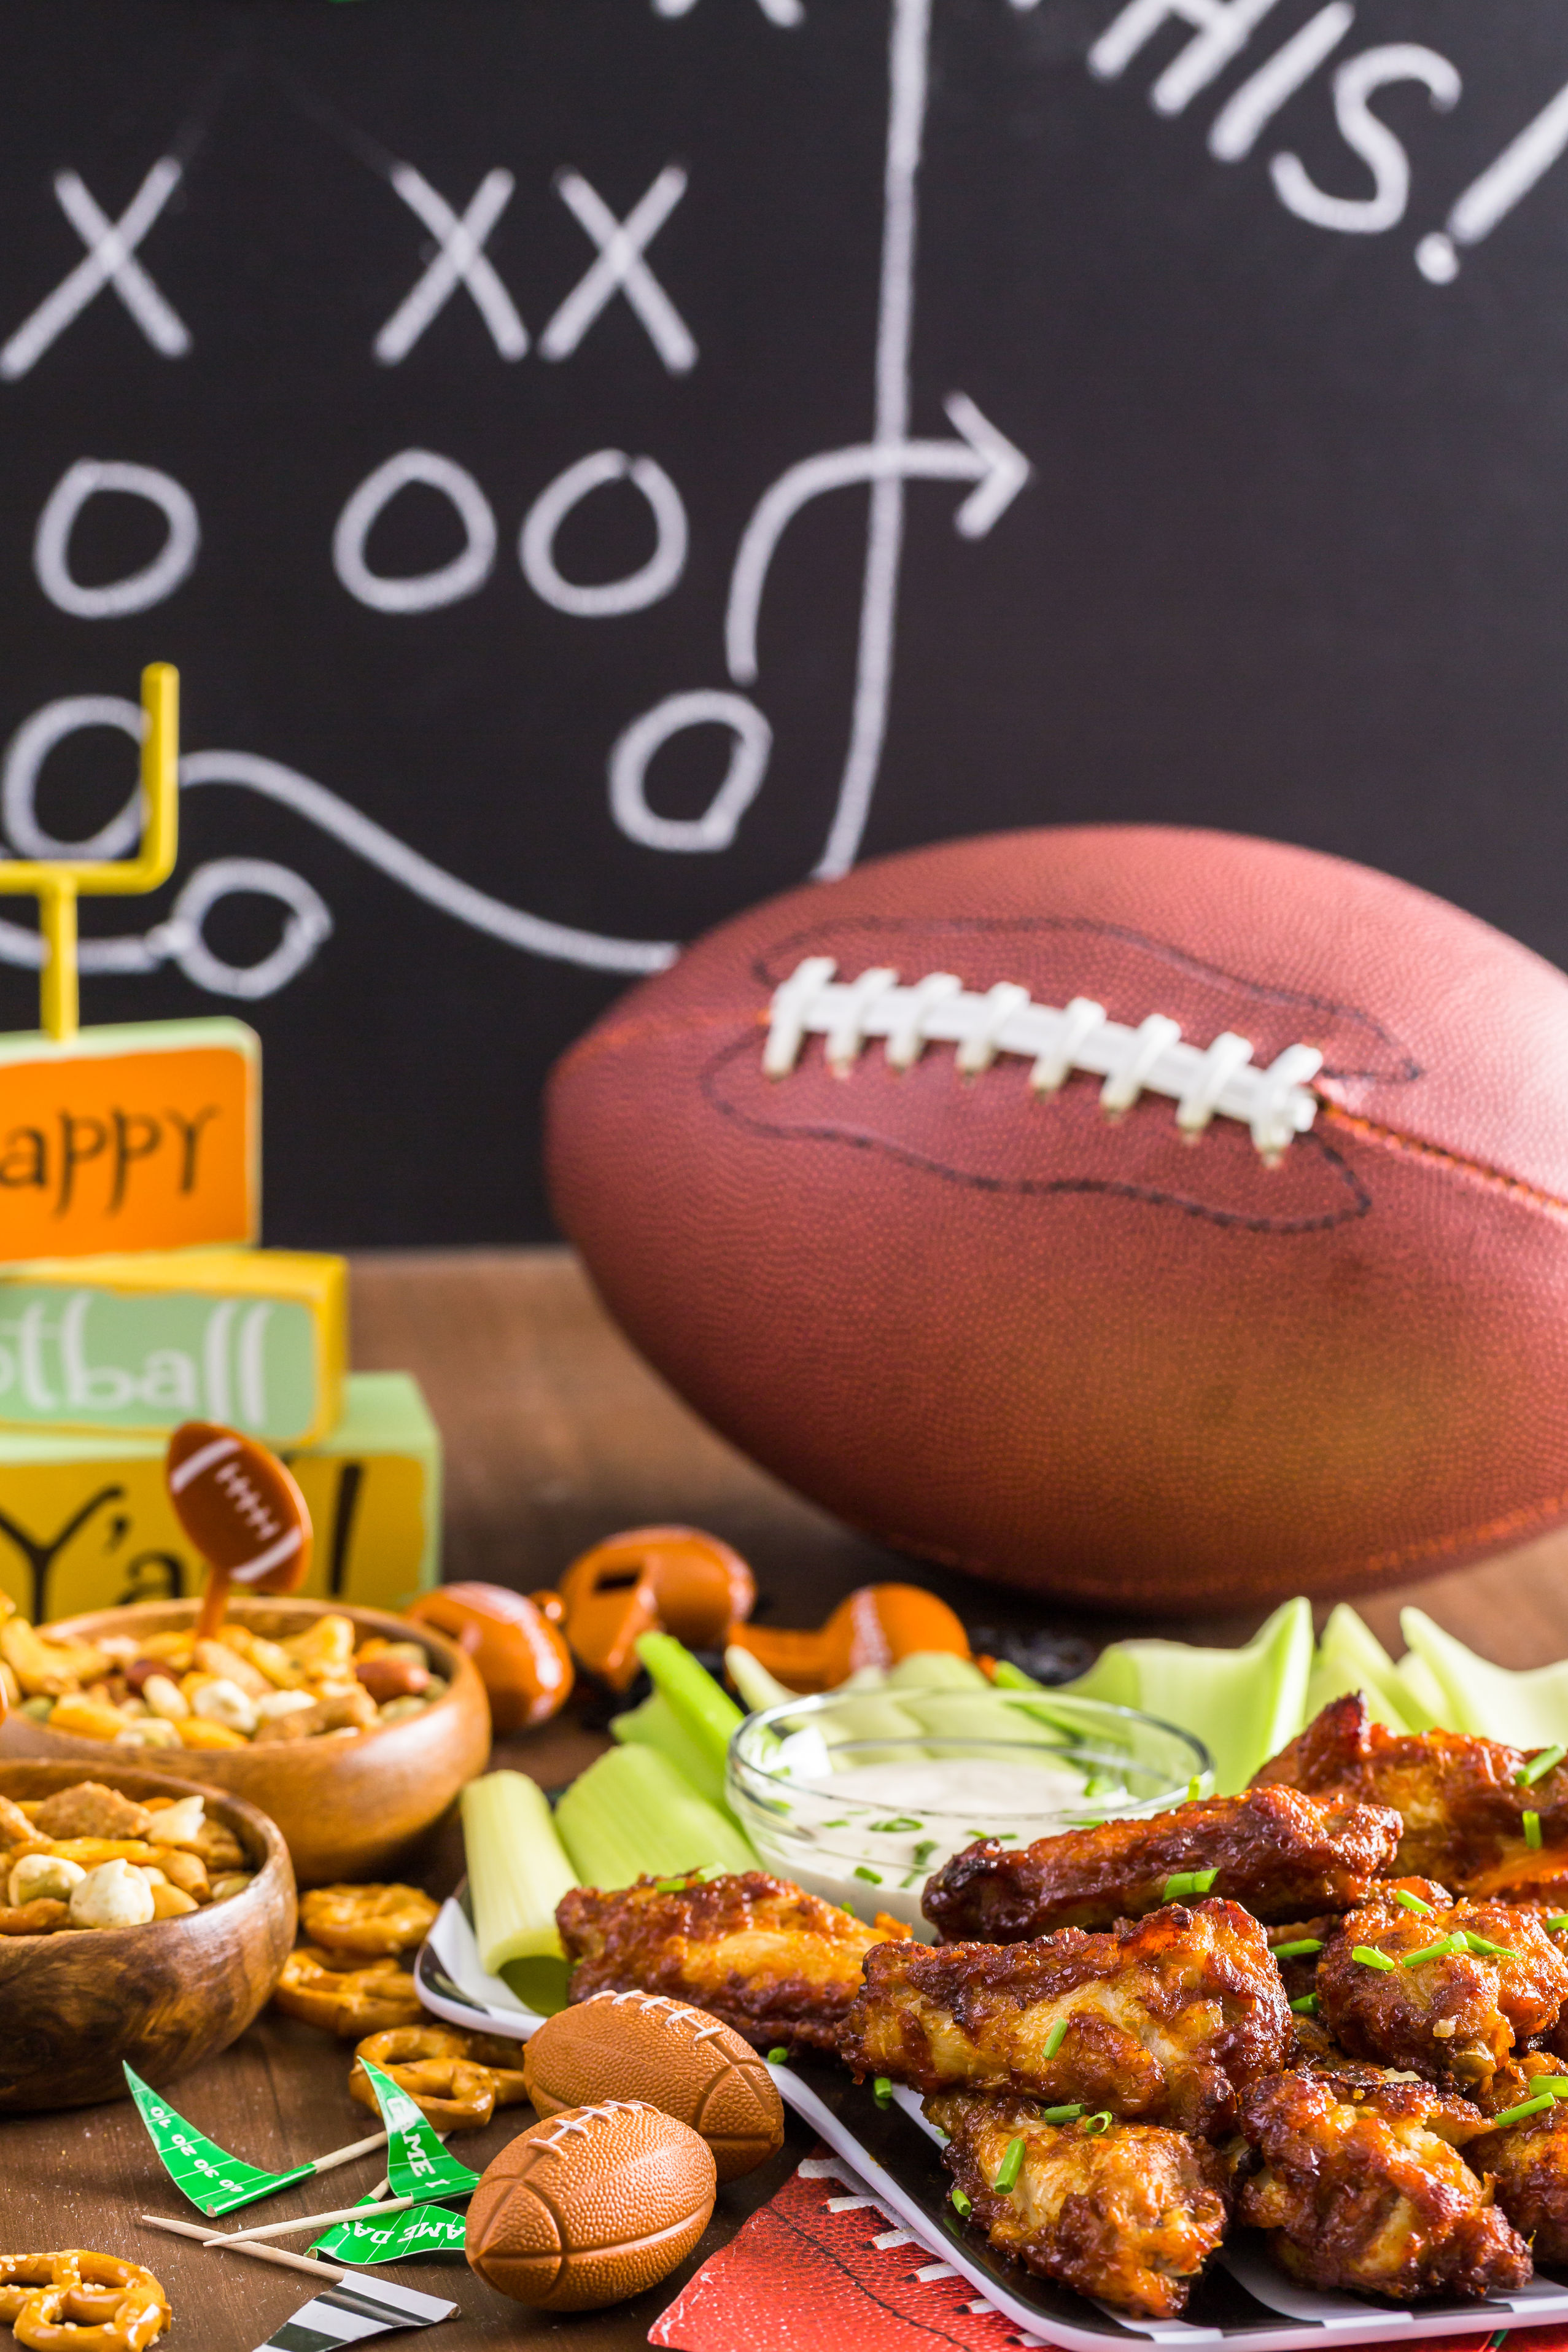 Super Bowl Kosher Catering | Groceries, Recipes, Catering and Gourmet ...